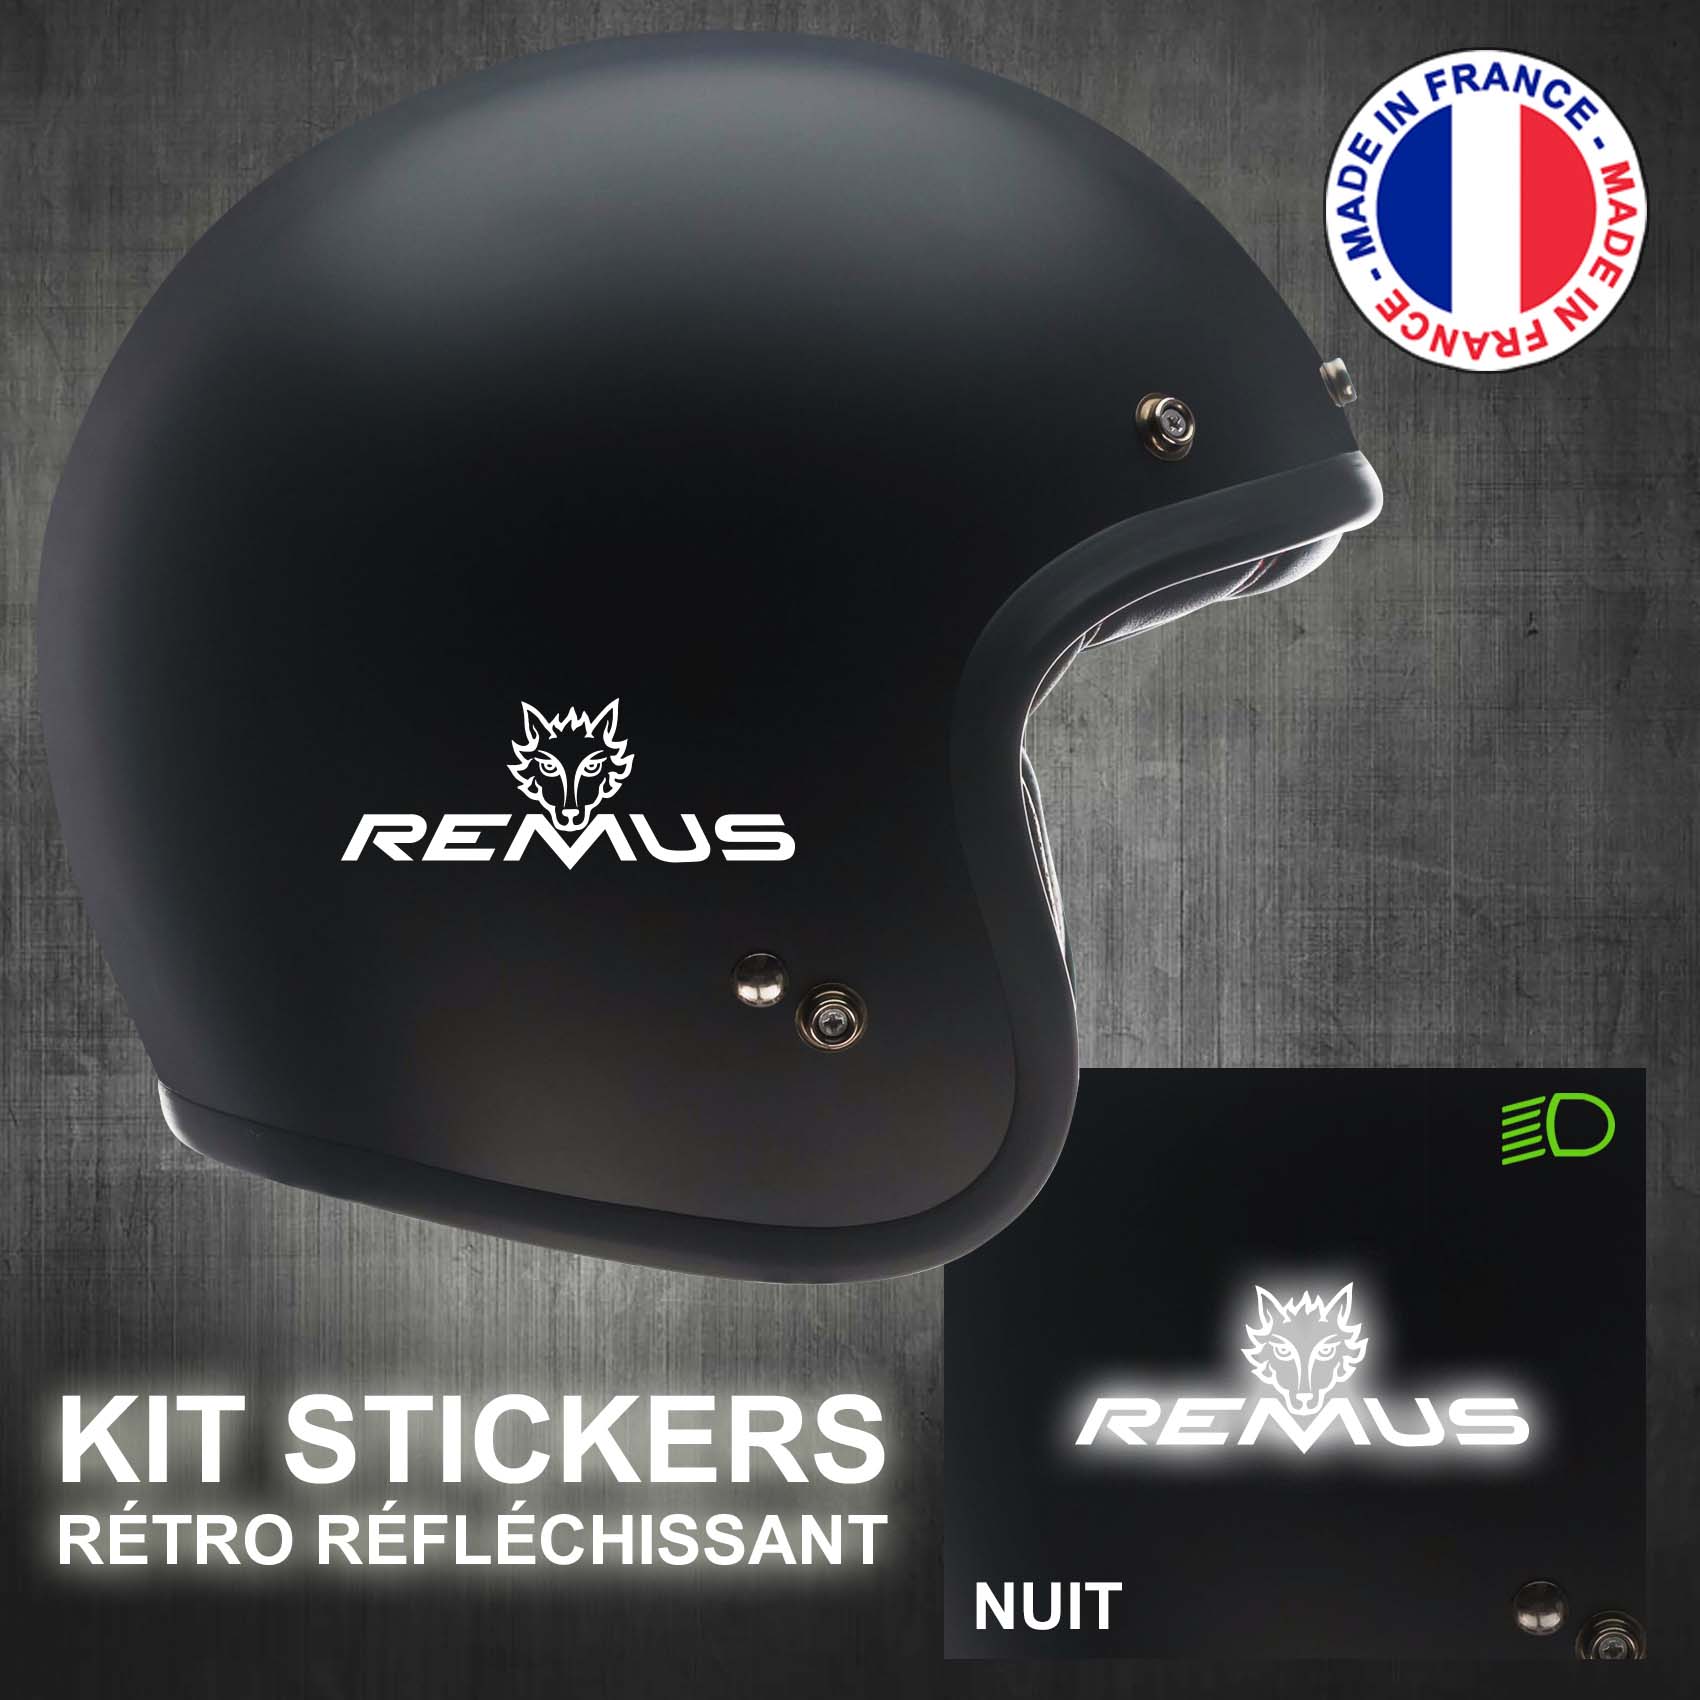 stickers-casque-moto-remus-ref1-retro-reflechissant-autocollant-noir-moto-velo-tuning-racing-route-sticker-casques-adhesif-scooter-nuit-securite-decals-personnalise-personnalisable-min